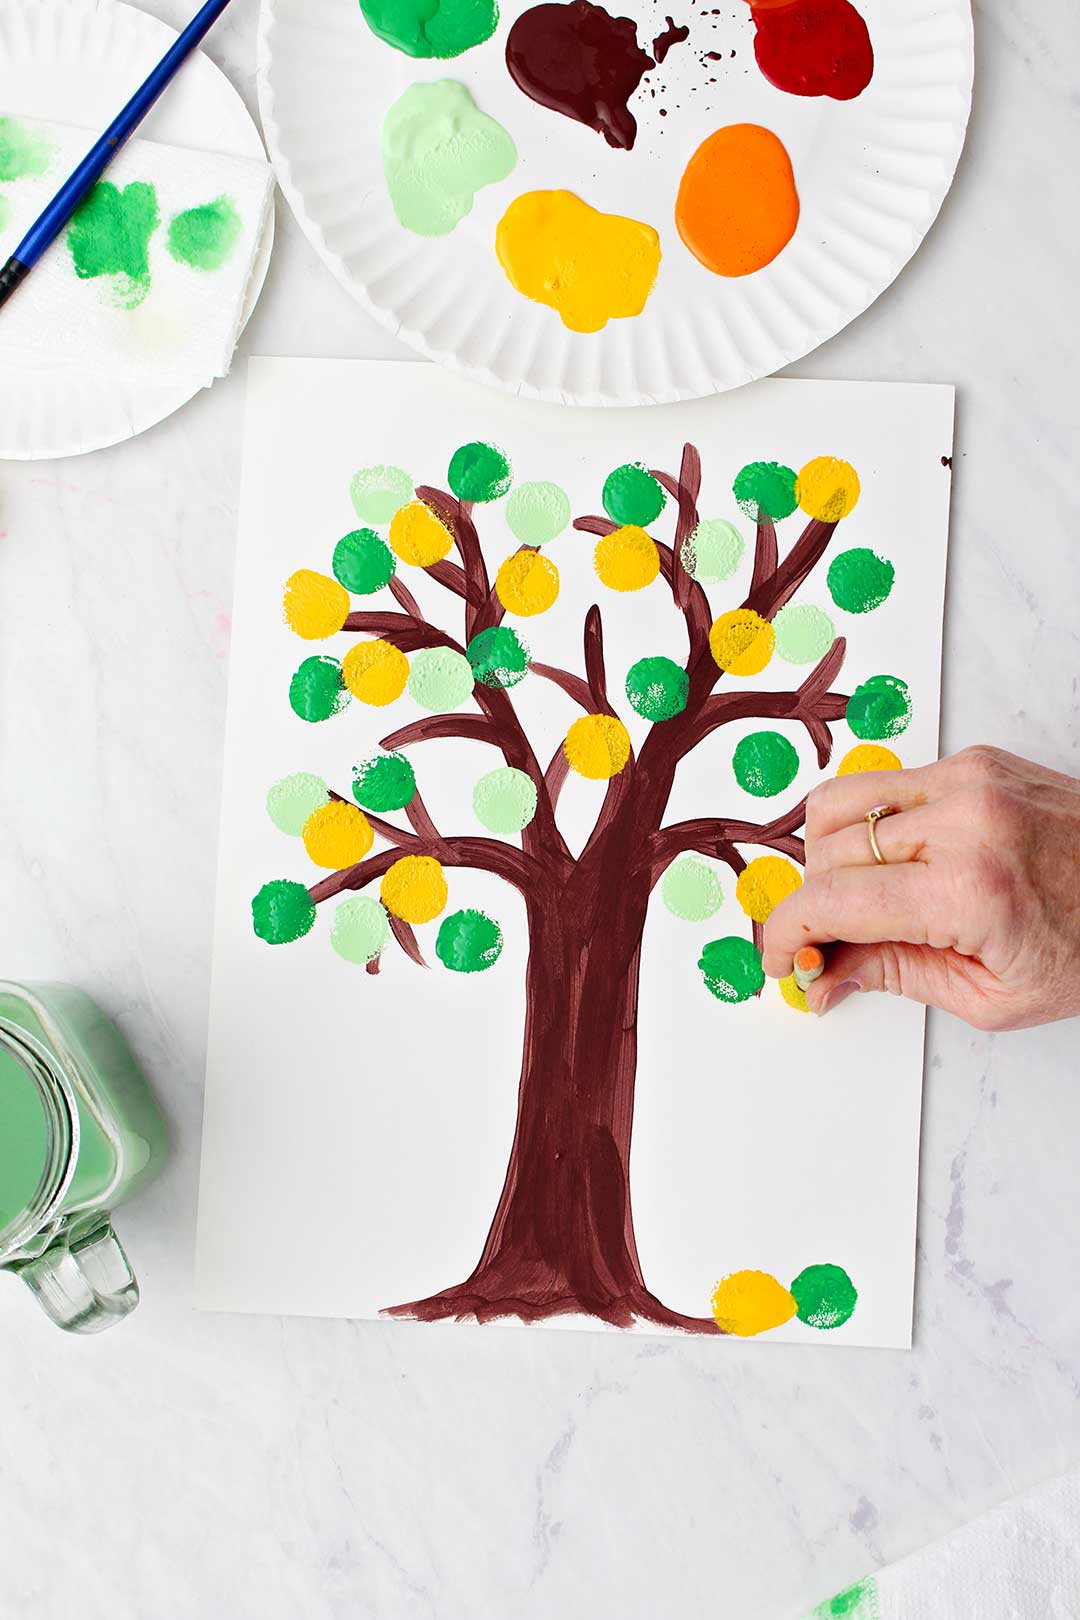 8 Tips for Using Acrylic Craft Paint - Make